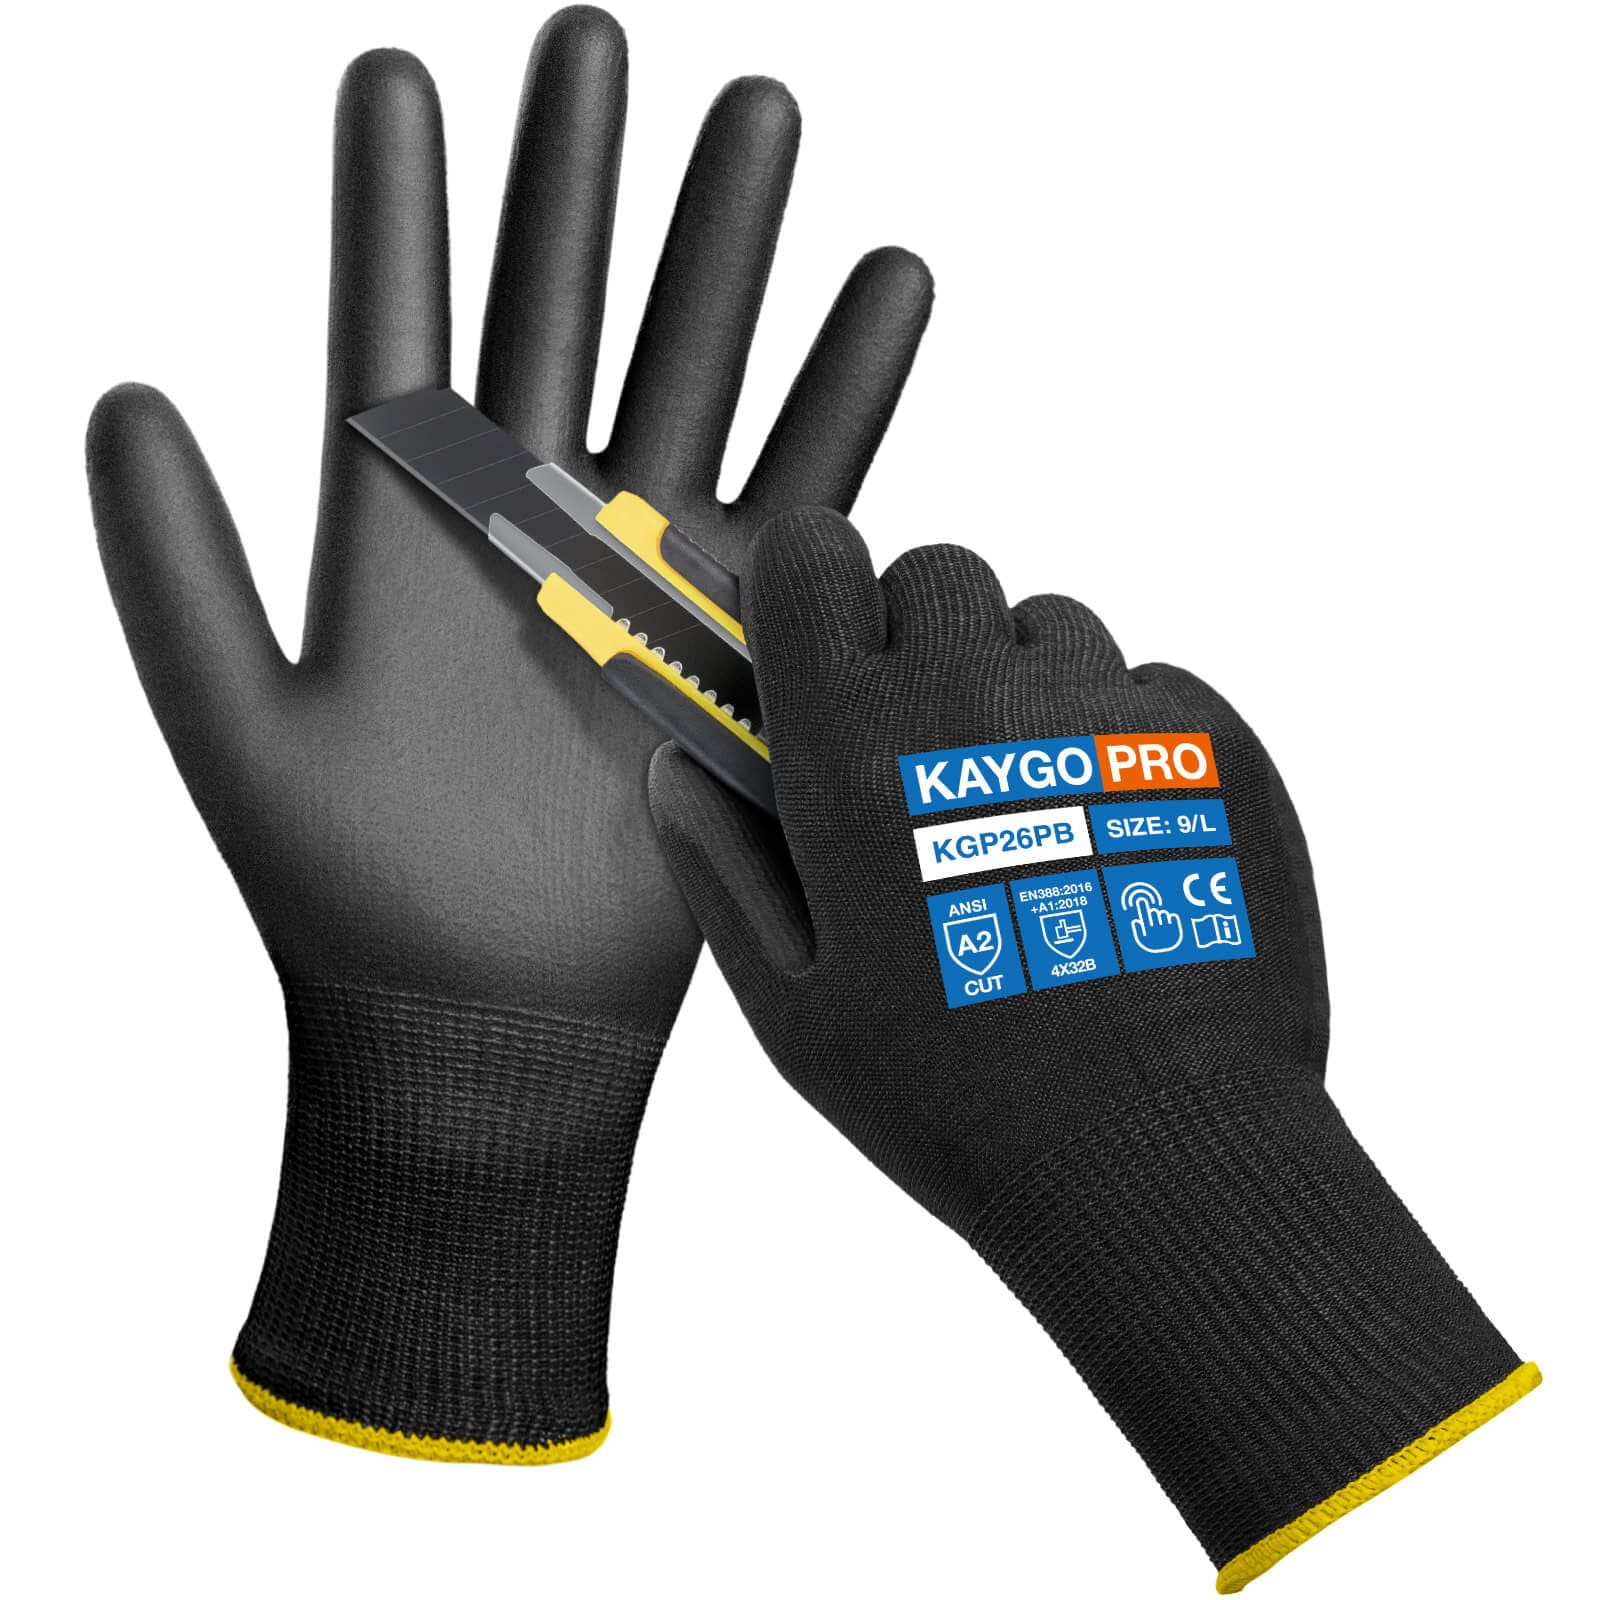 A2 Cut Resistant Gloves with PU Coated Smooth Grip on Palm & Fingers - Touchscreen Compatible